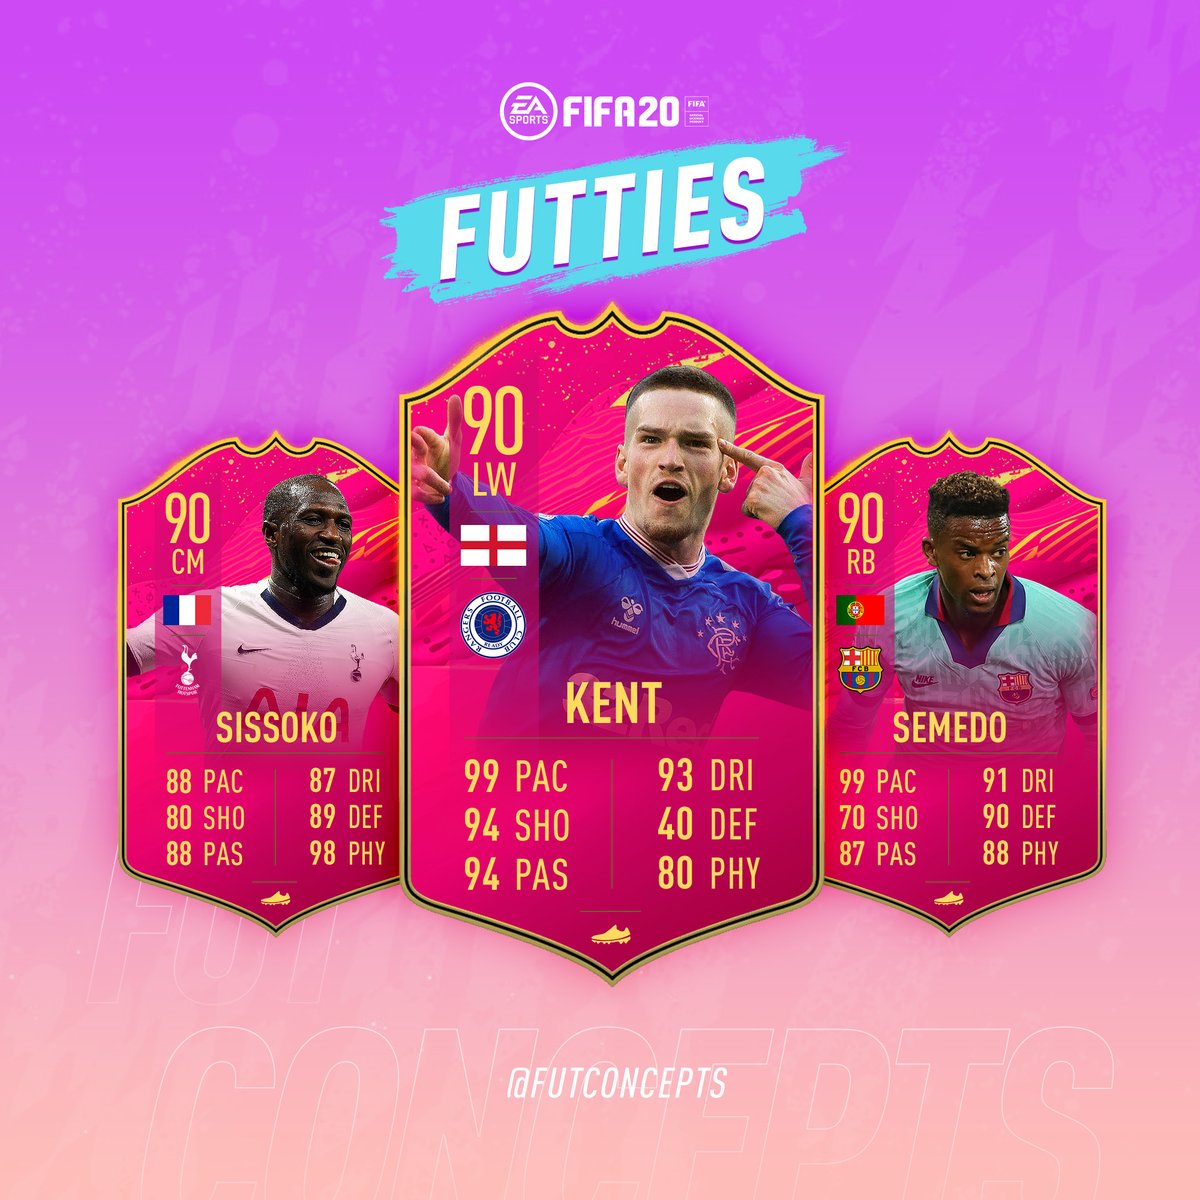 Fut Concepts A Glimpse Into The Future Which Of These Op Fifa Cards Are You Most Excited Scared For S And S Appreciated Fut Futties Futconcepts T Co Pwdc2gmdte